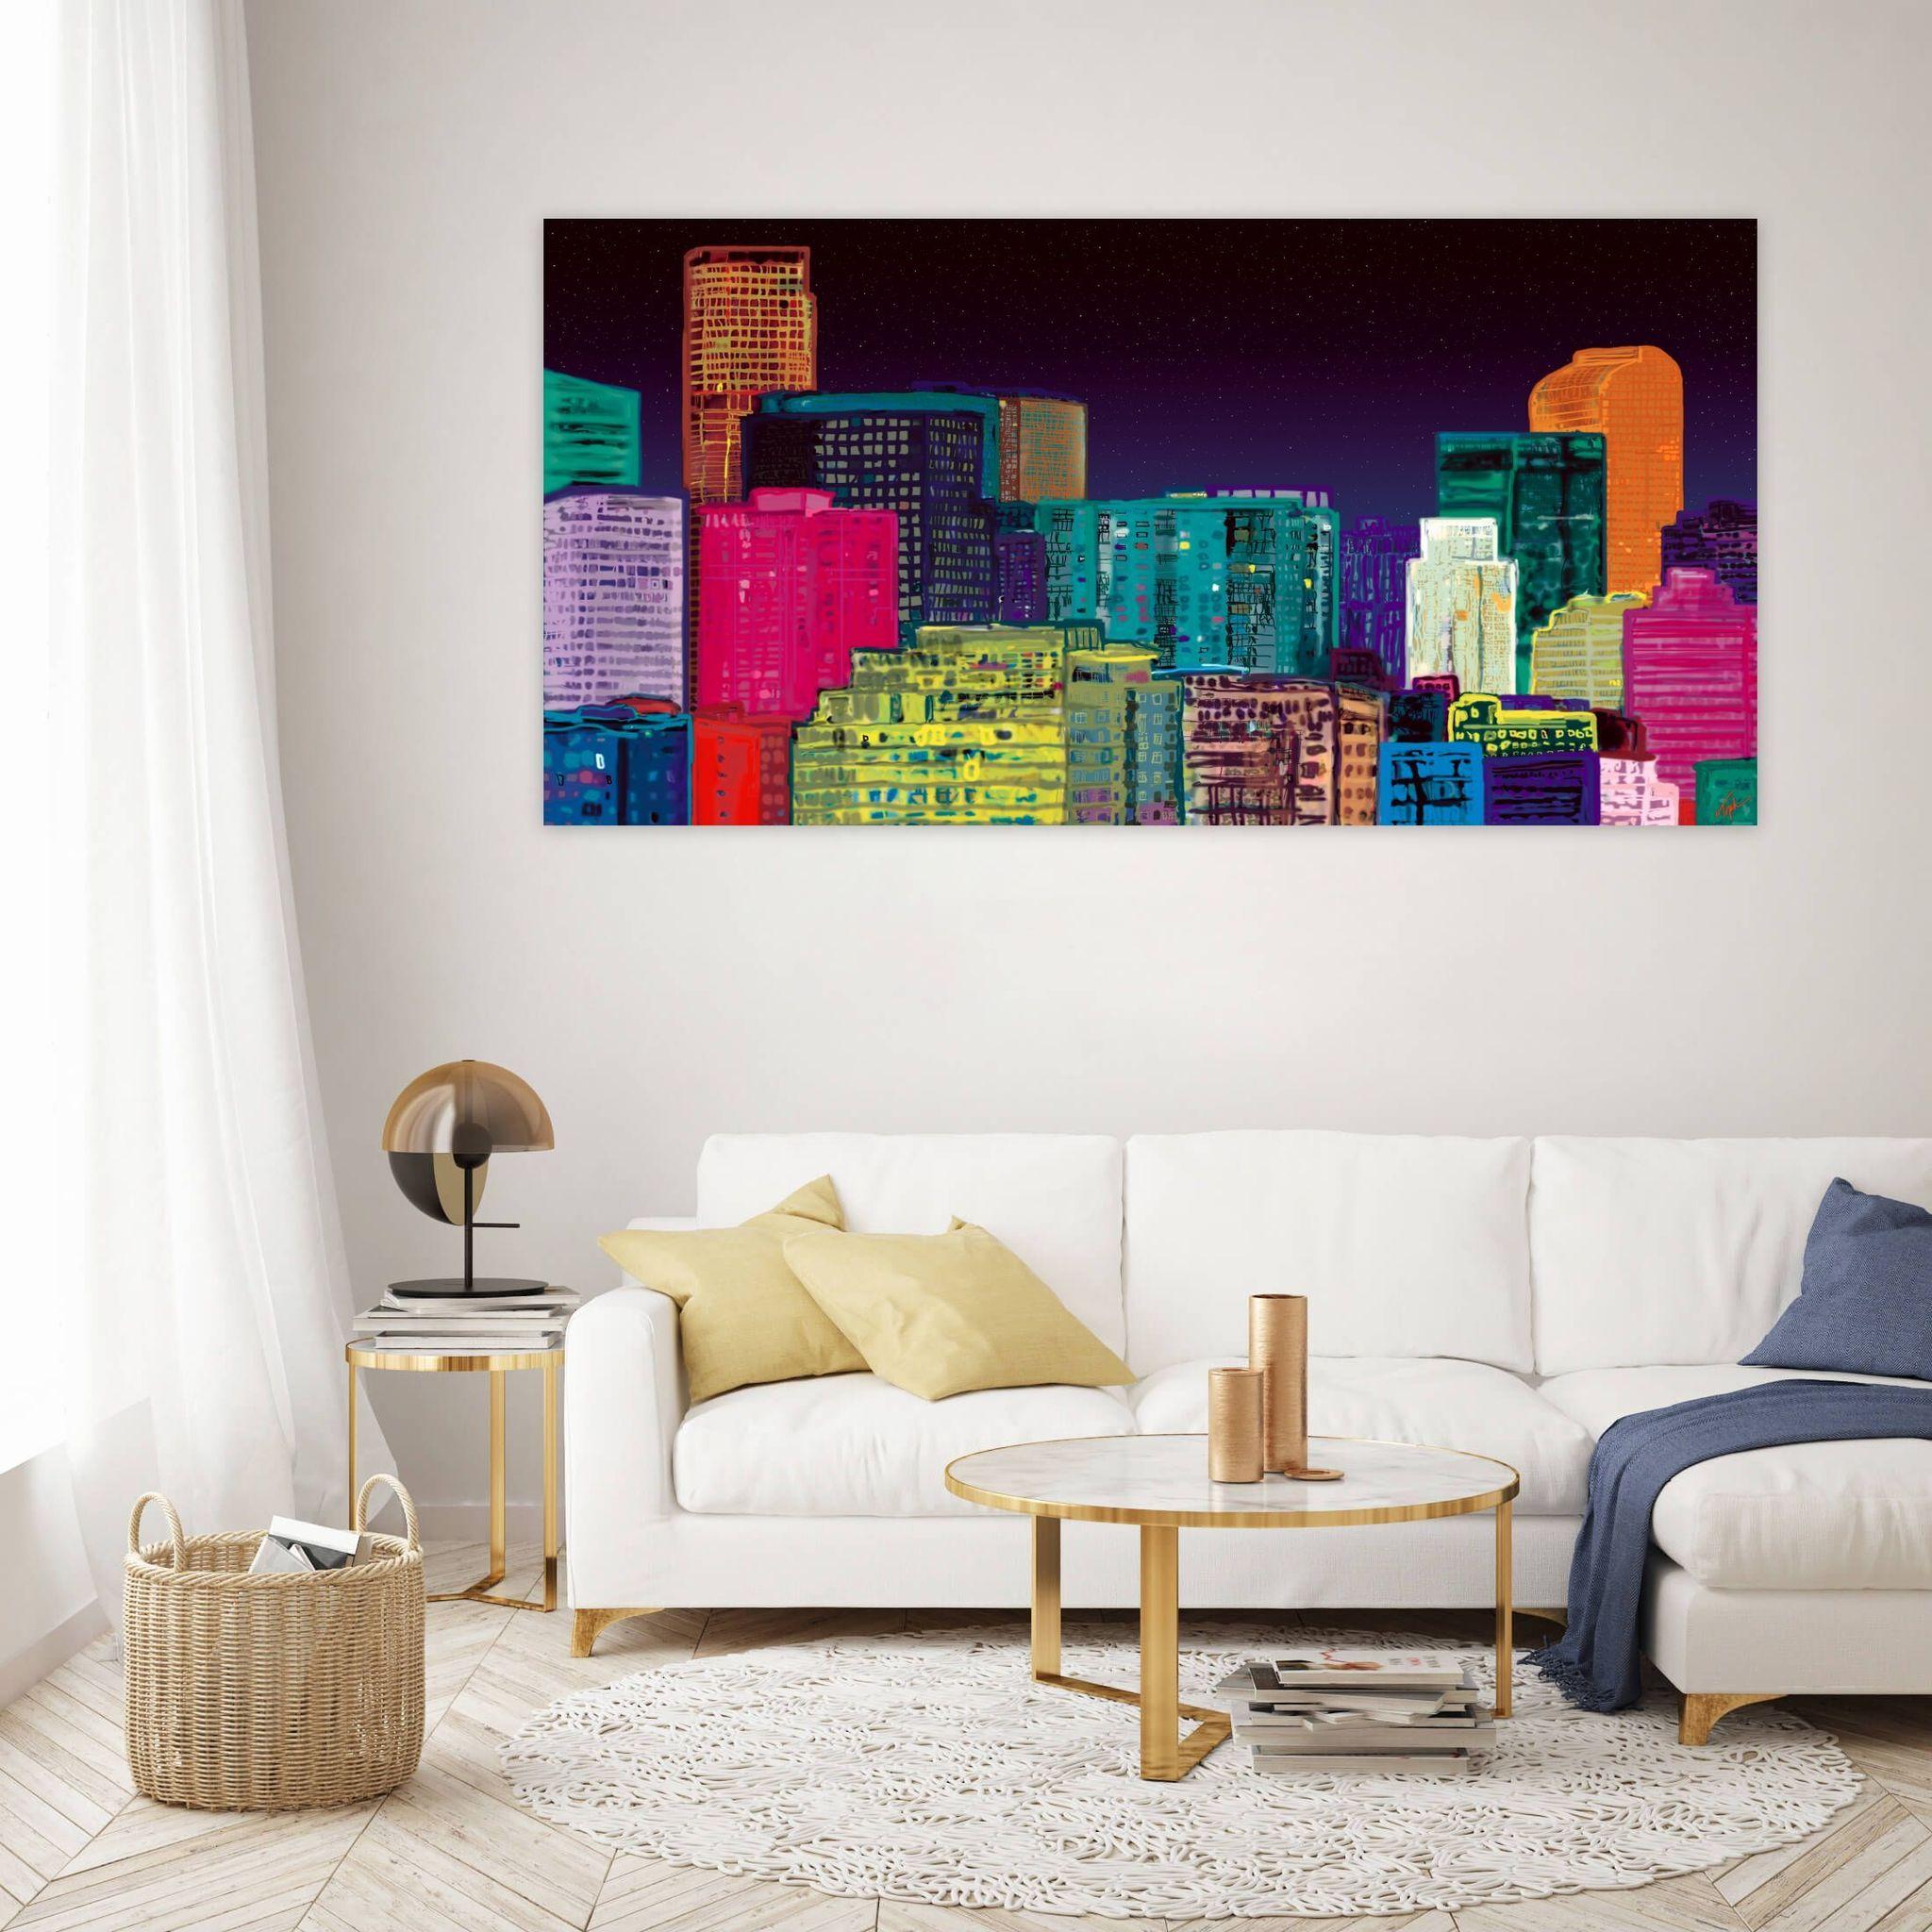 Denver, Night, Original Contemporary Impressionist Cityscape, 2019 - Painting by Topher Straus